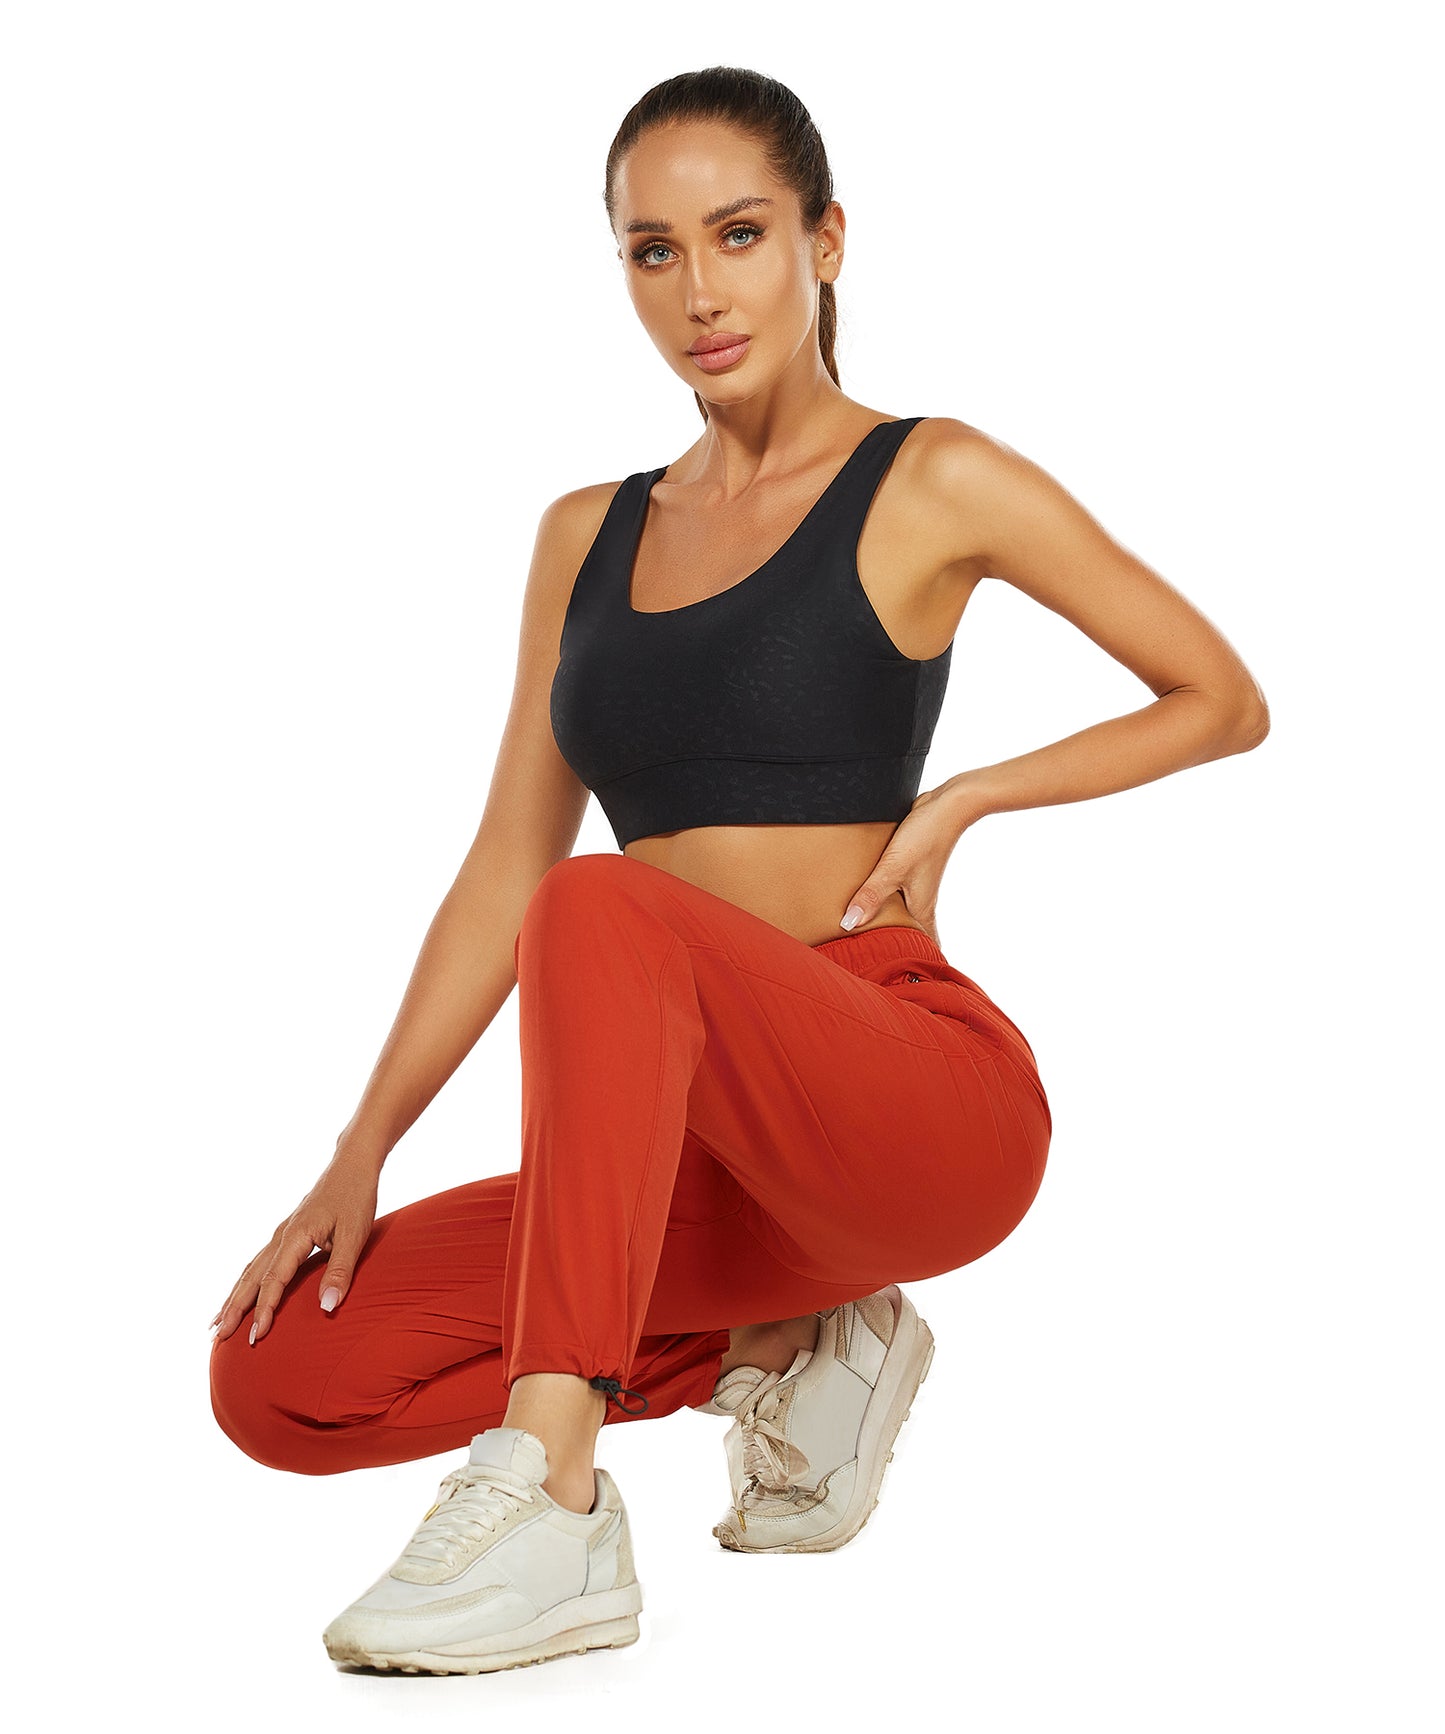 One for All High-Waisted Hiking Pants Orange